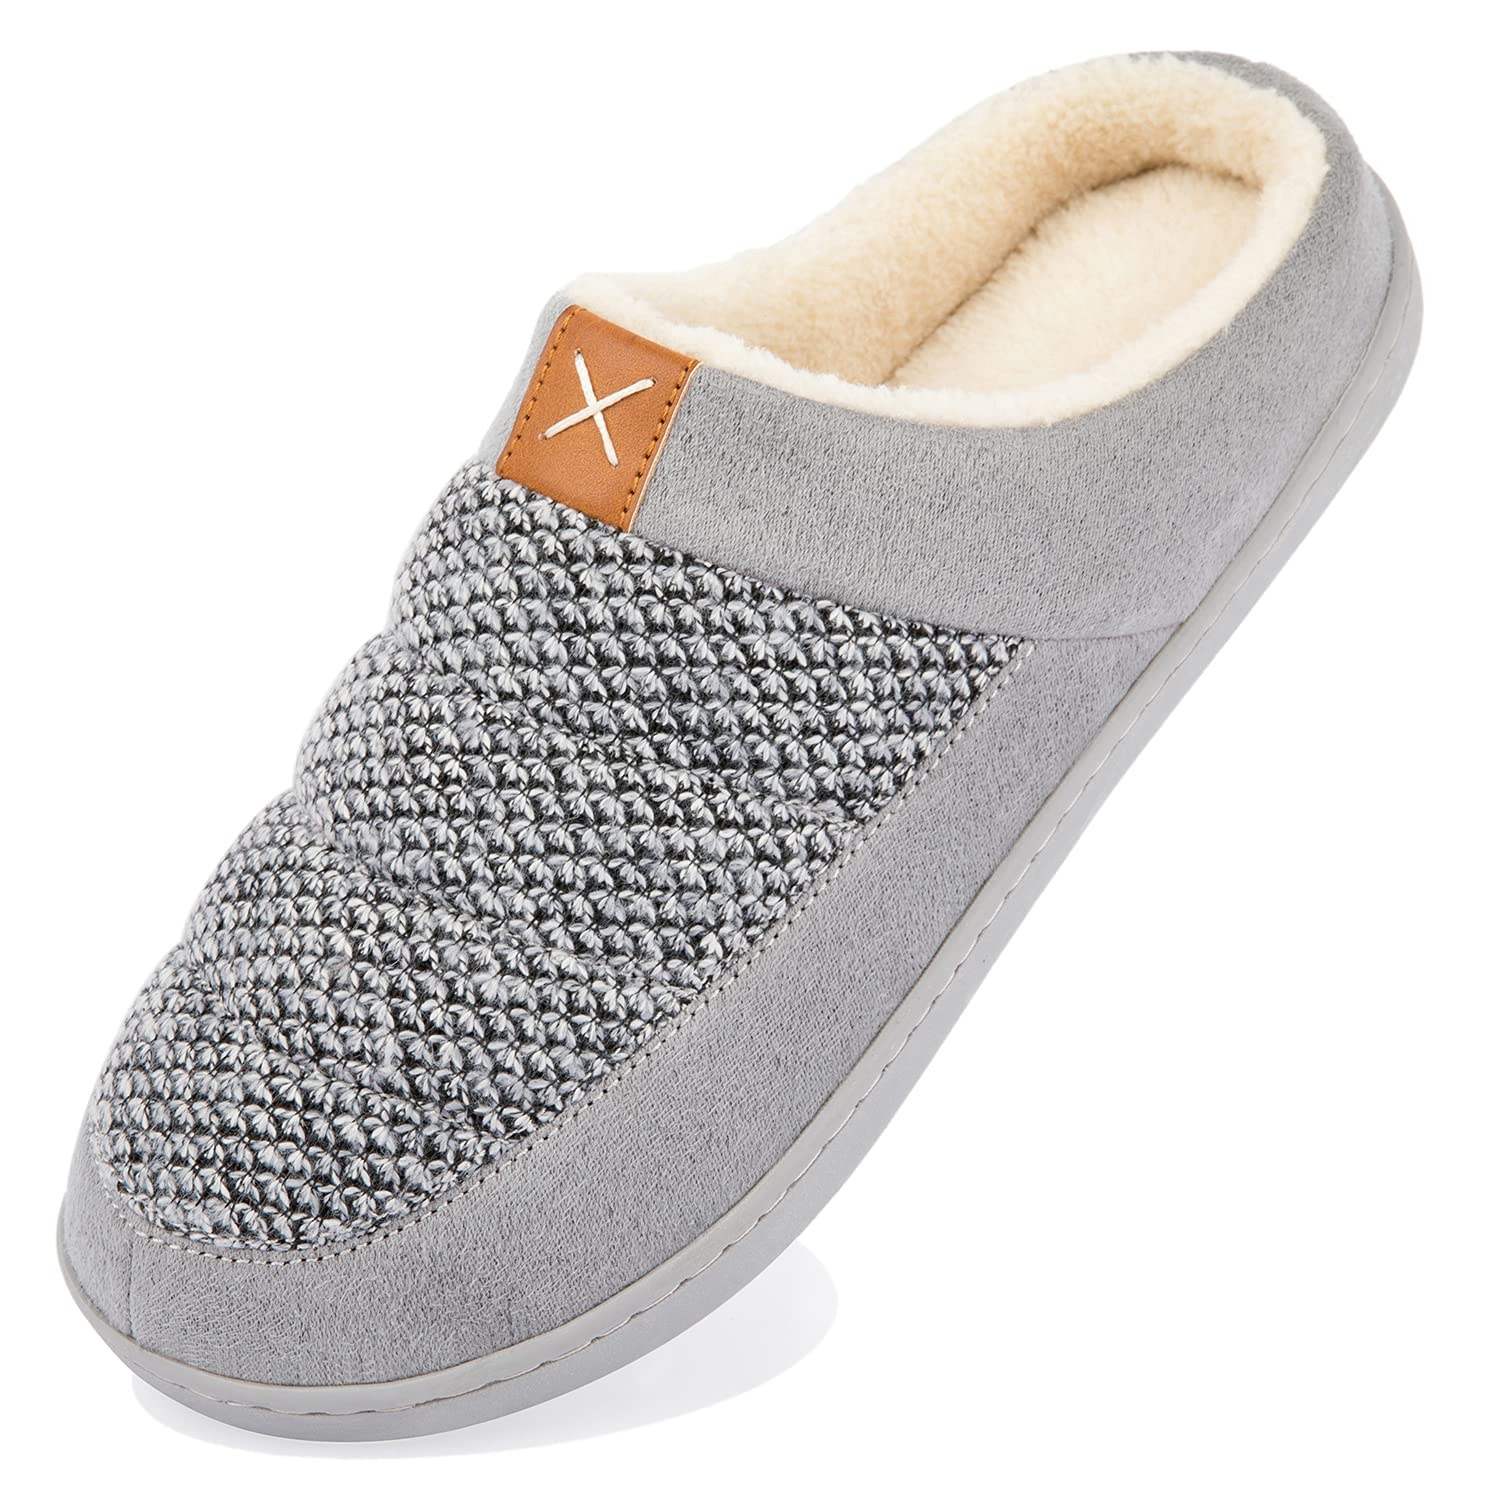 Newdenber Mens Cozy Memory Foam Slippers Soft Fuzzy Plush Lined Slip On Indoor Outdoor Clog House Shoes (11-12 D(M) Us, Grey)